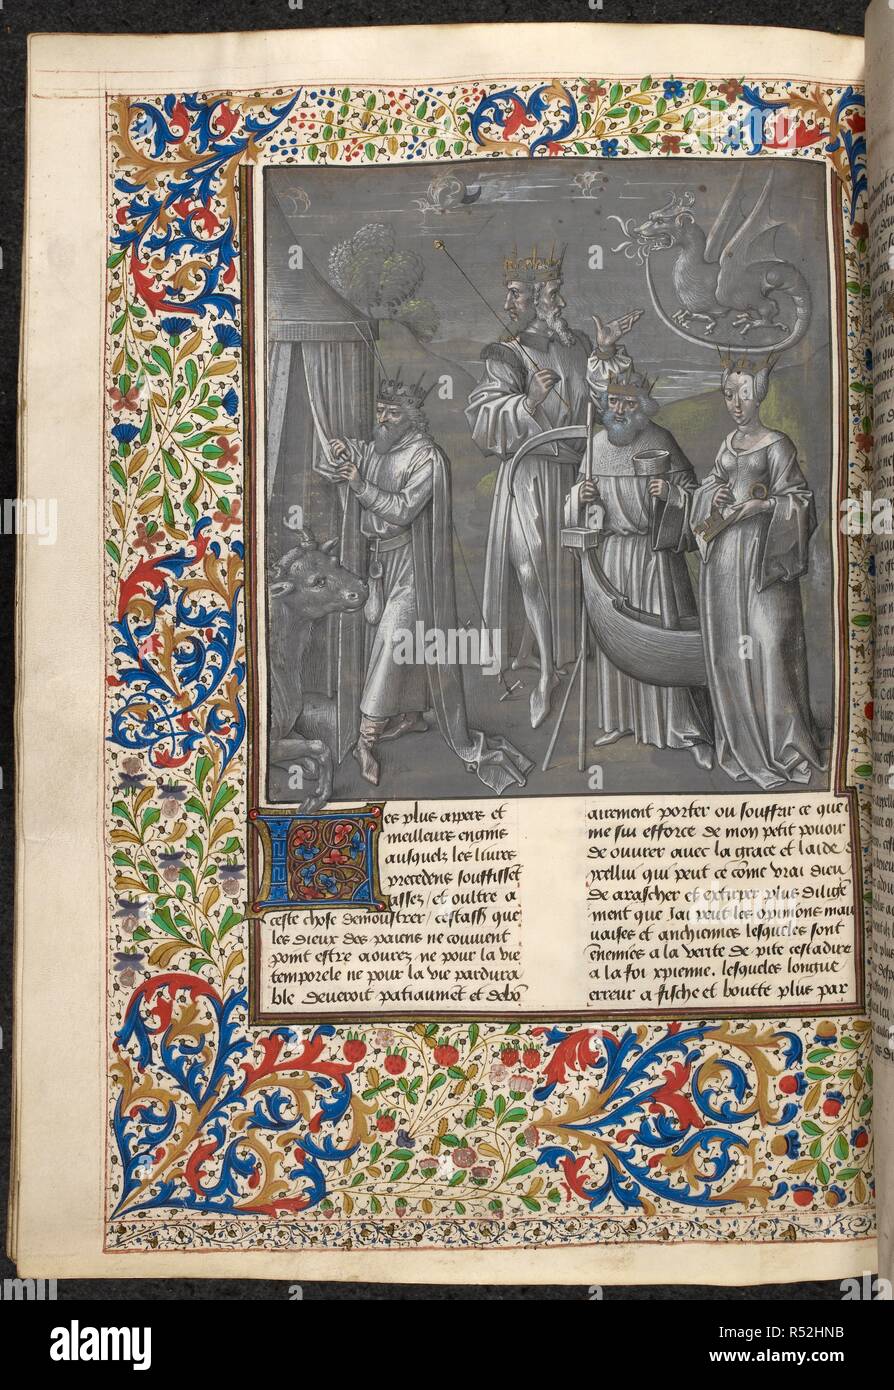 Janus and other deities. S. AUGUSTINE, De civitate Dei, in French: the translation and commentary made by Raoul de Presles for Charles V of France. Late 15th century. Source: Royal 14 D. I f.299v. Language: French. Author: de Presles, Raoul (Translator). Stock Photo